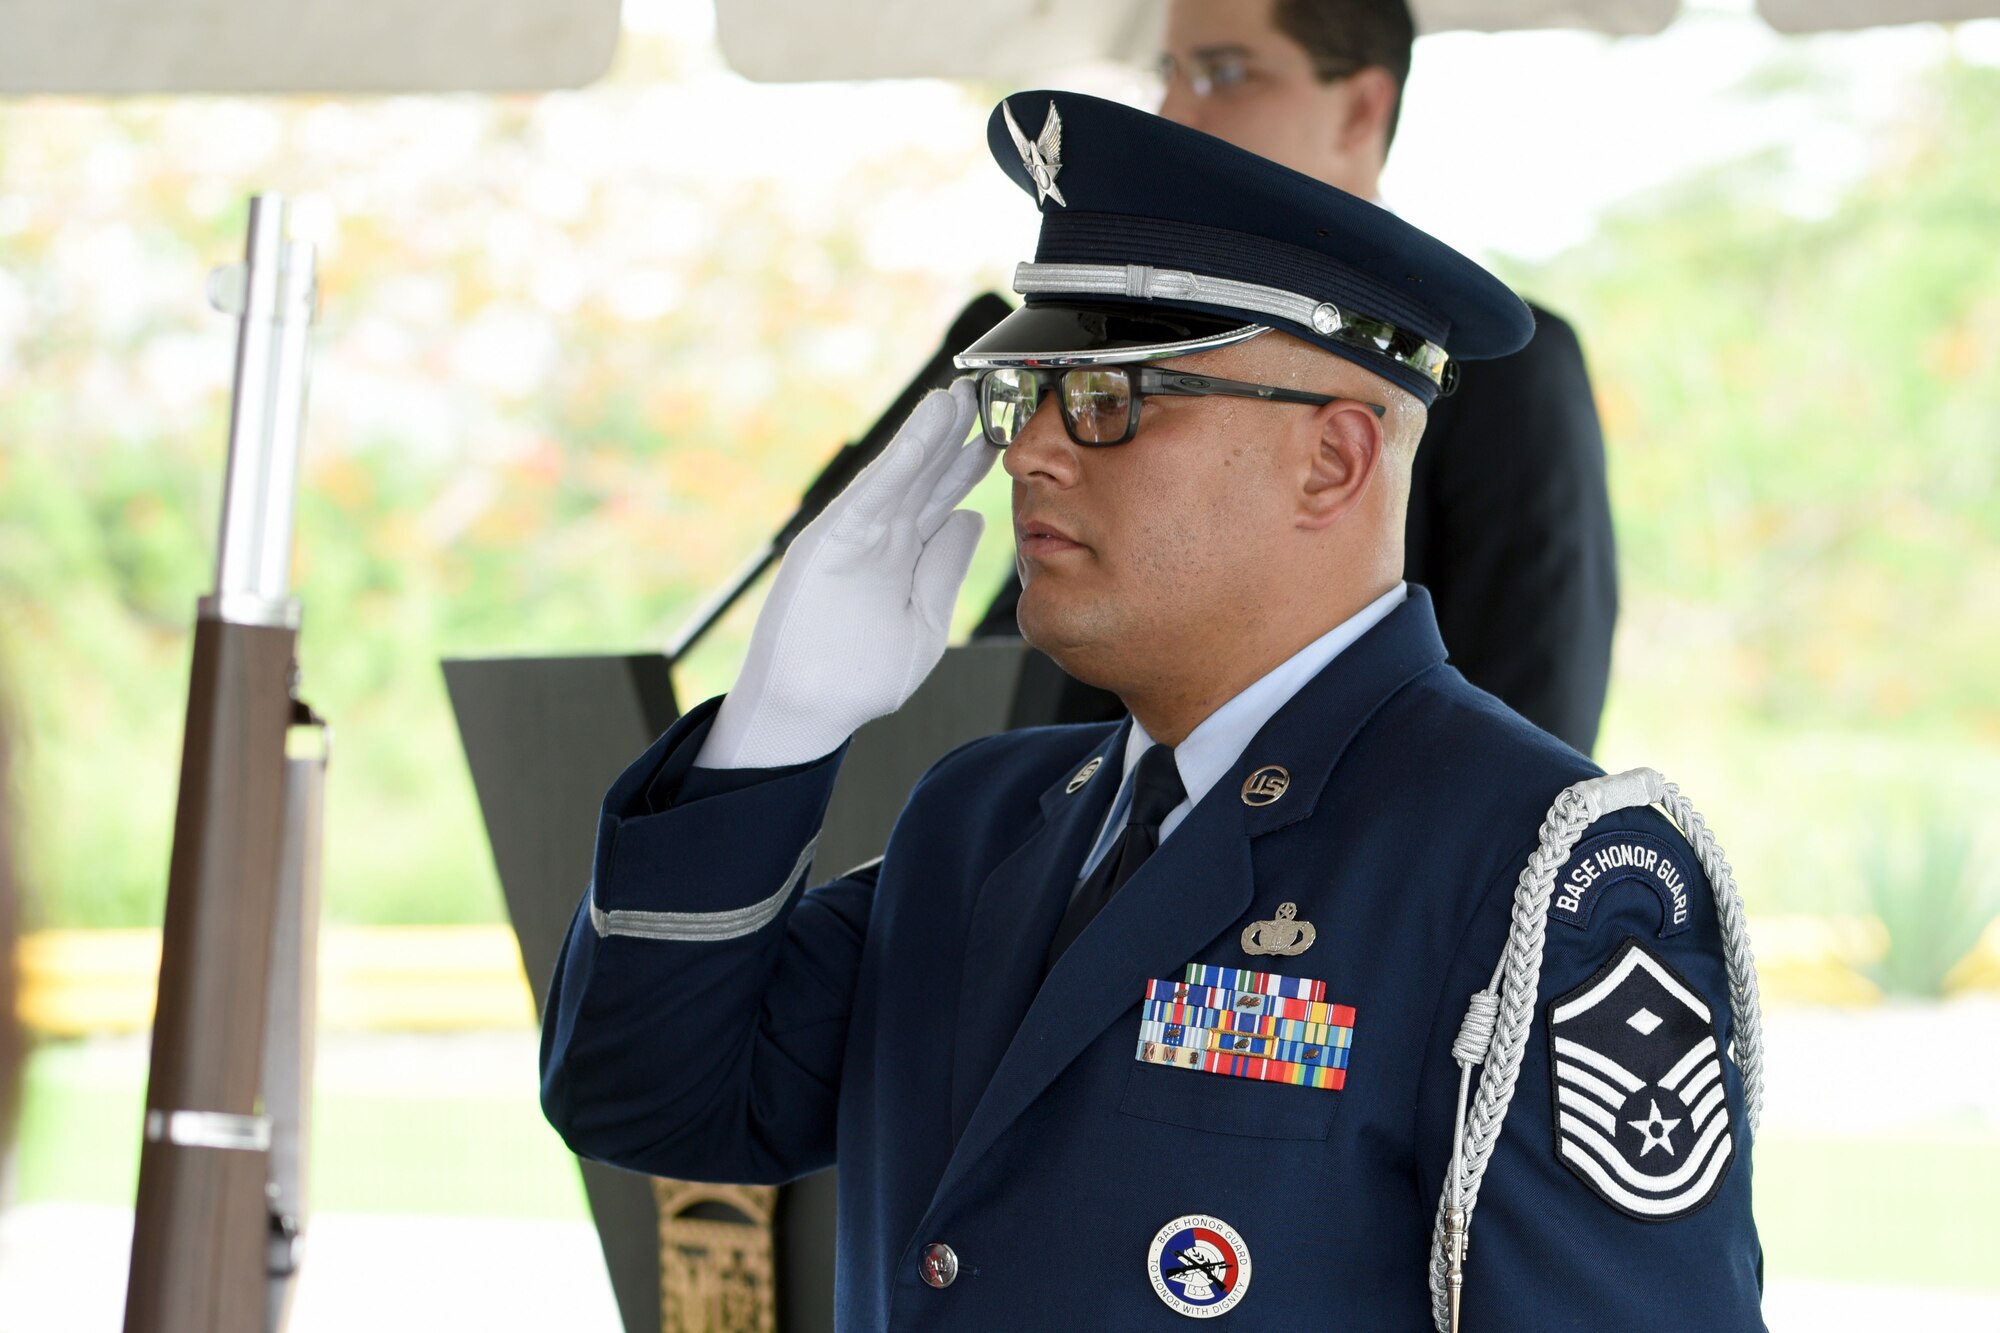 U.S. Airmen of the 156th Airlift Wing honor guard detail renders a salute during Brig. Gen. Mihiel Gilormini's posthumous street naming ceremony held in Yauco, Puerto Rico, July 15.